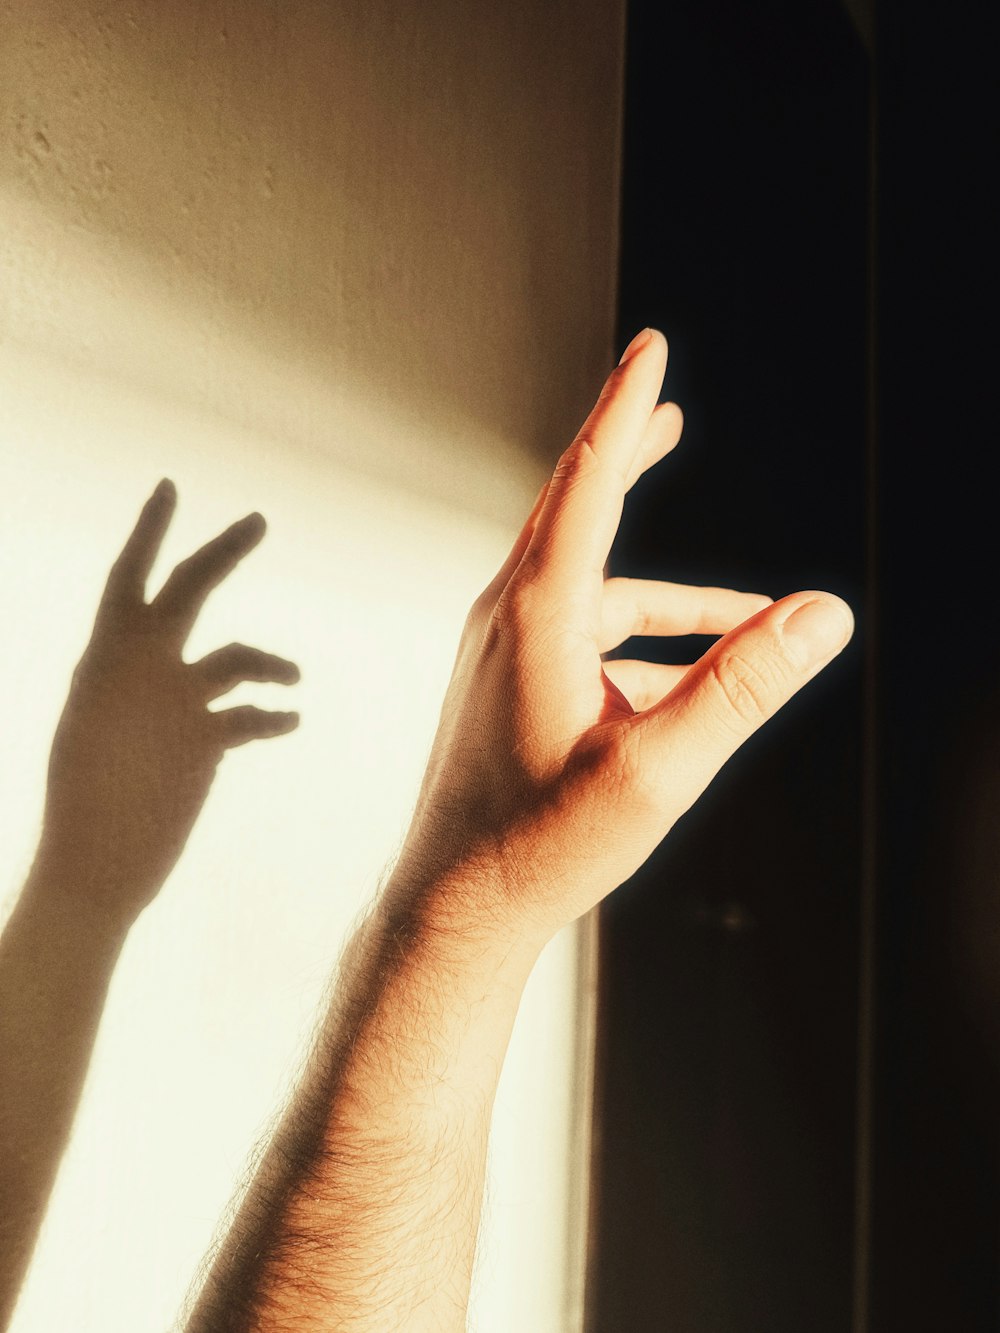 a person's hand reaching up towards a wall